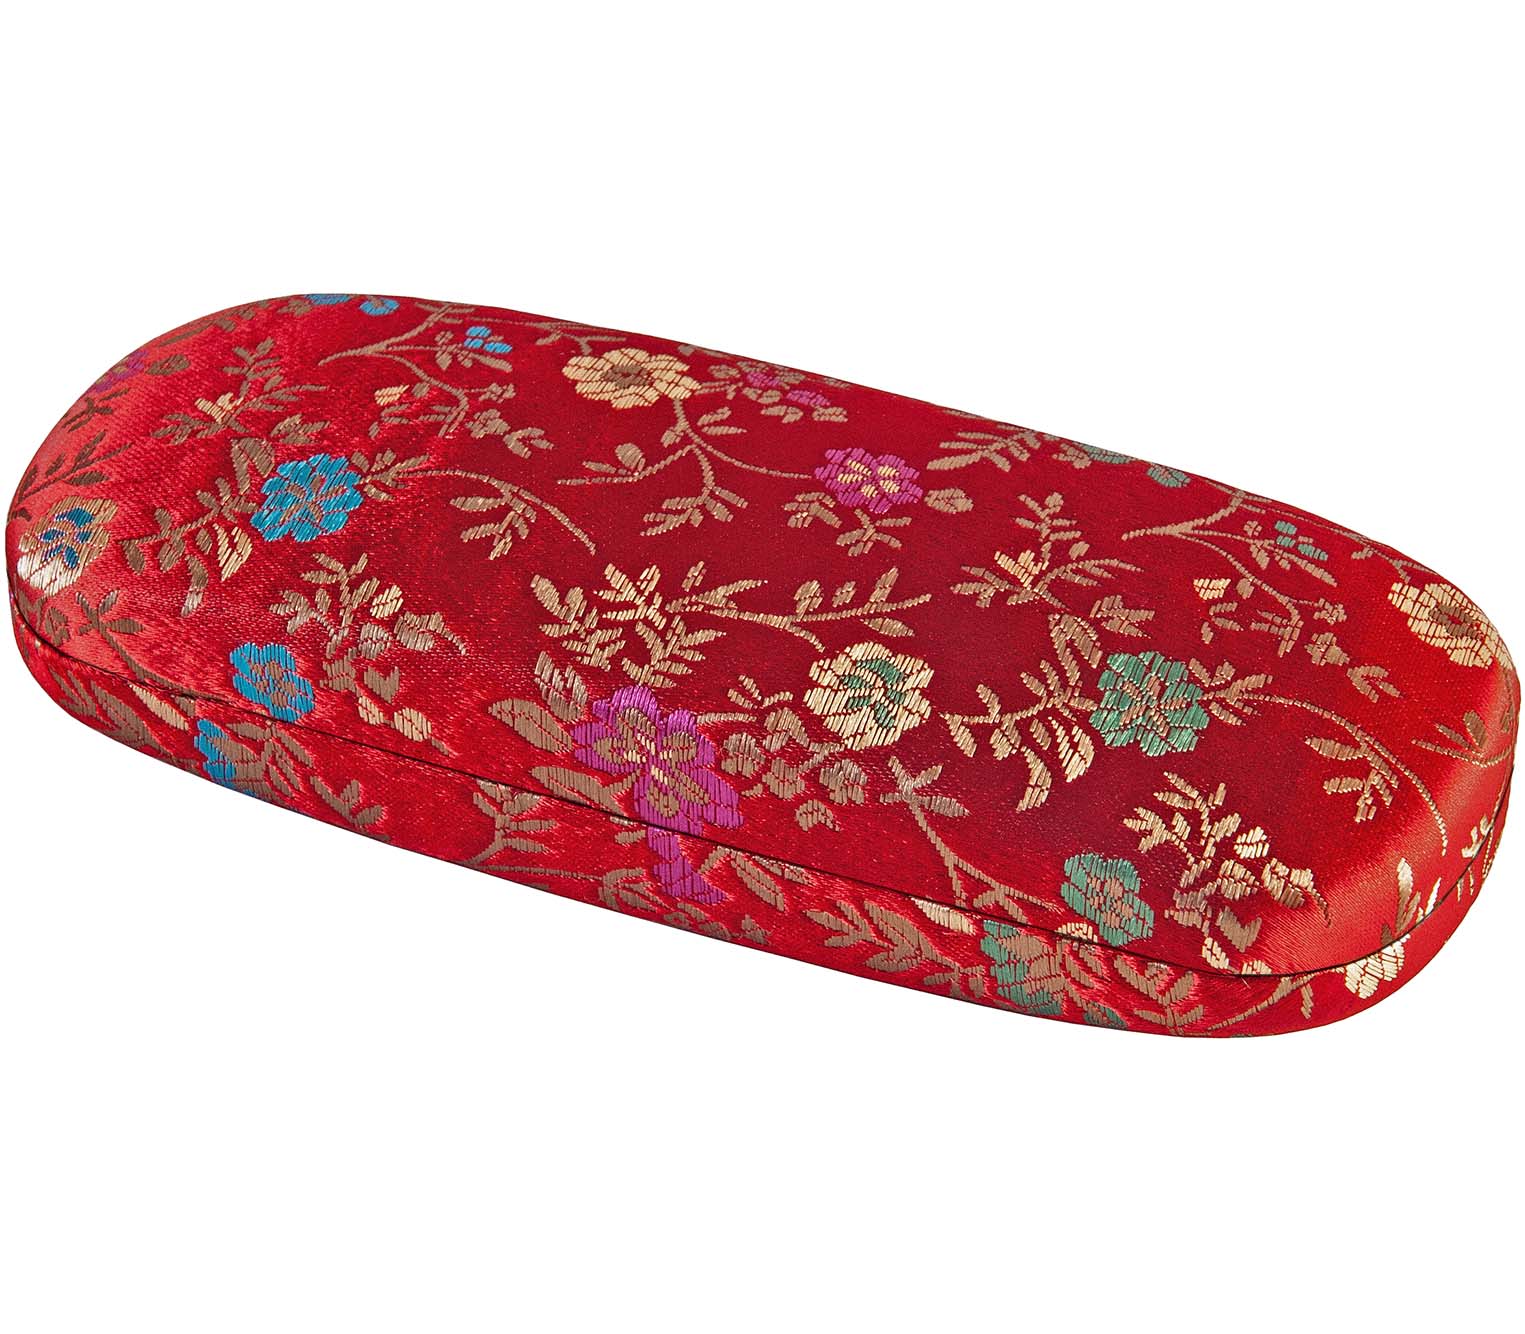 Main Image (Angle) - Diva (Red) Glasses Cases Accessories